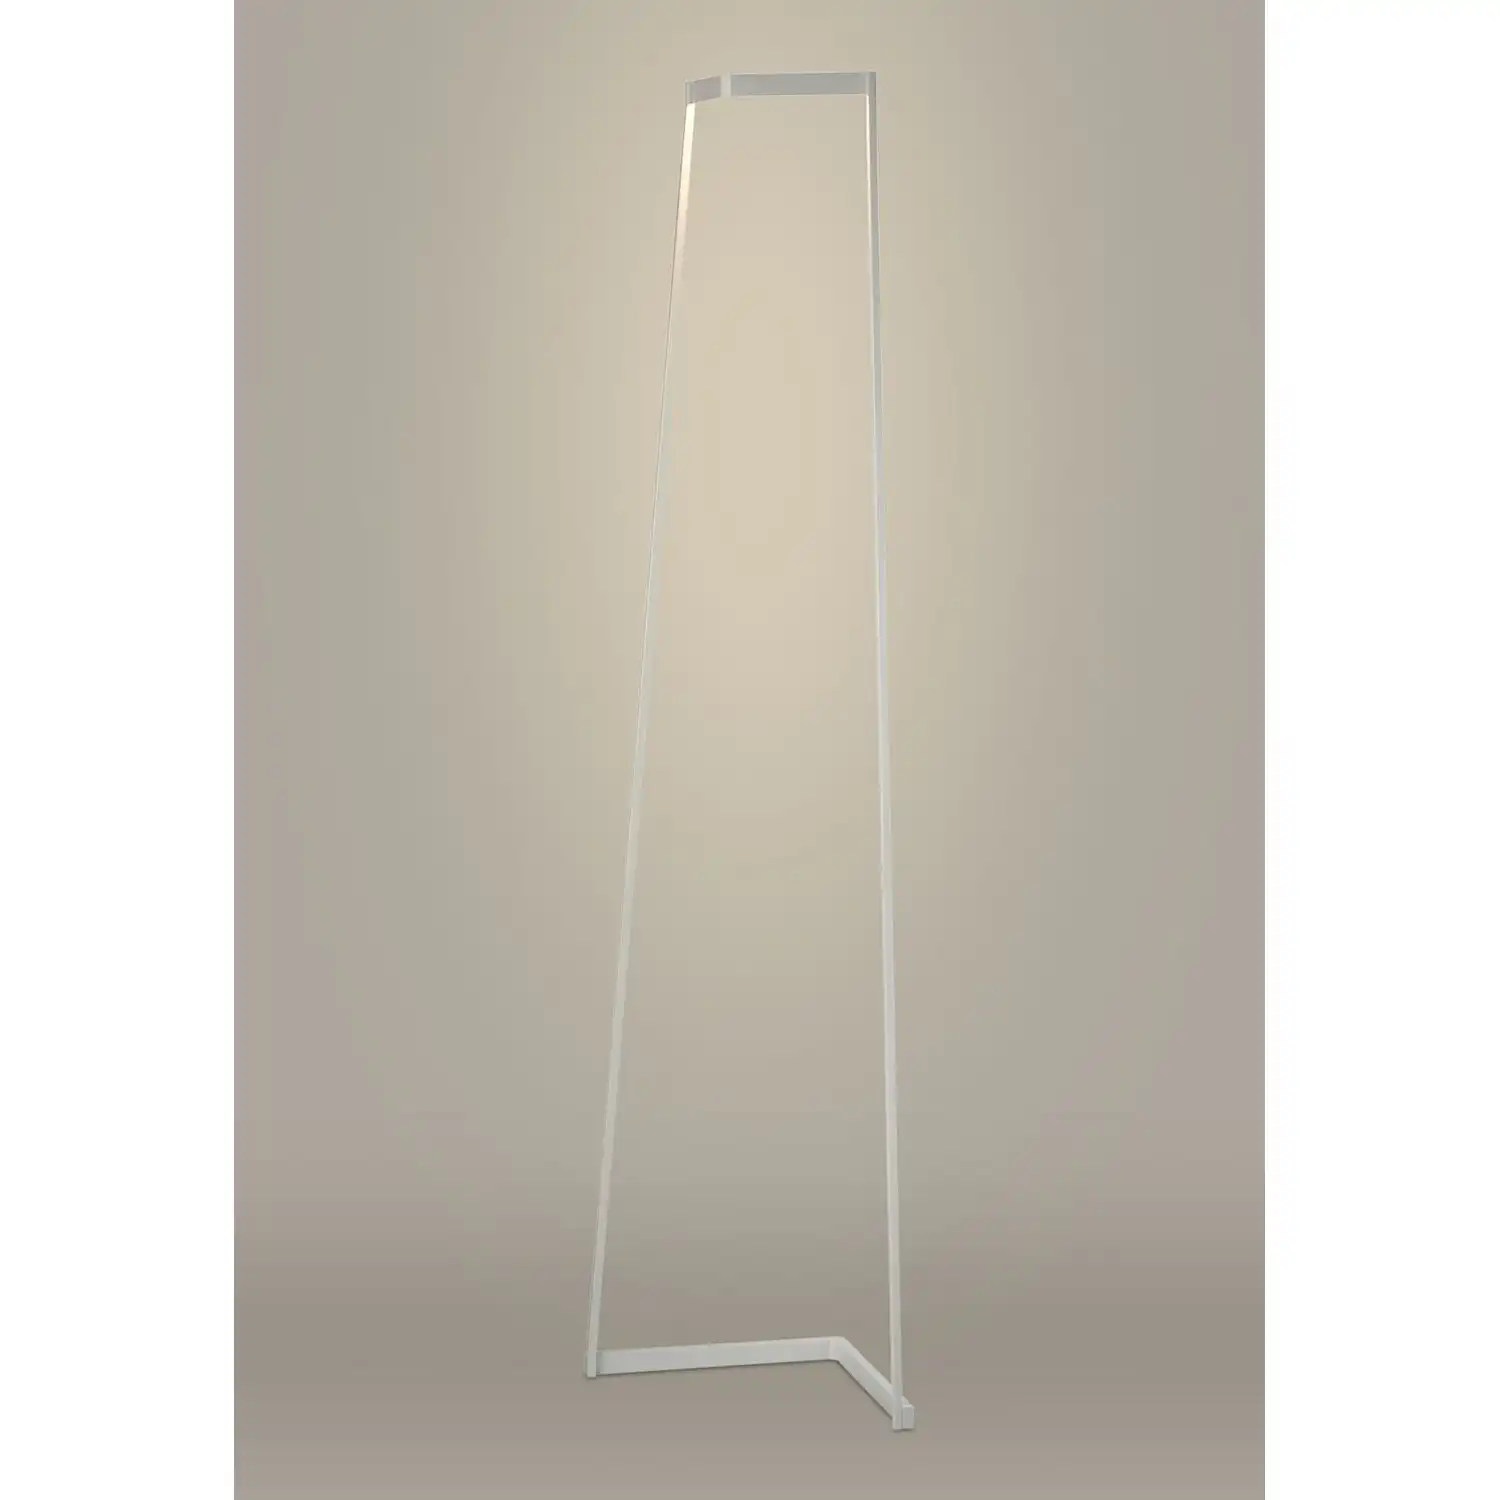 Minimal Floor Lamp, 40W LED, 3000K, 3000lm, Dimmable, White, 3yrs Warranty